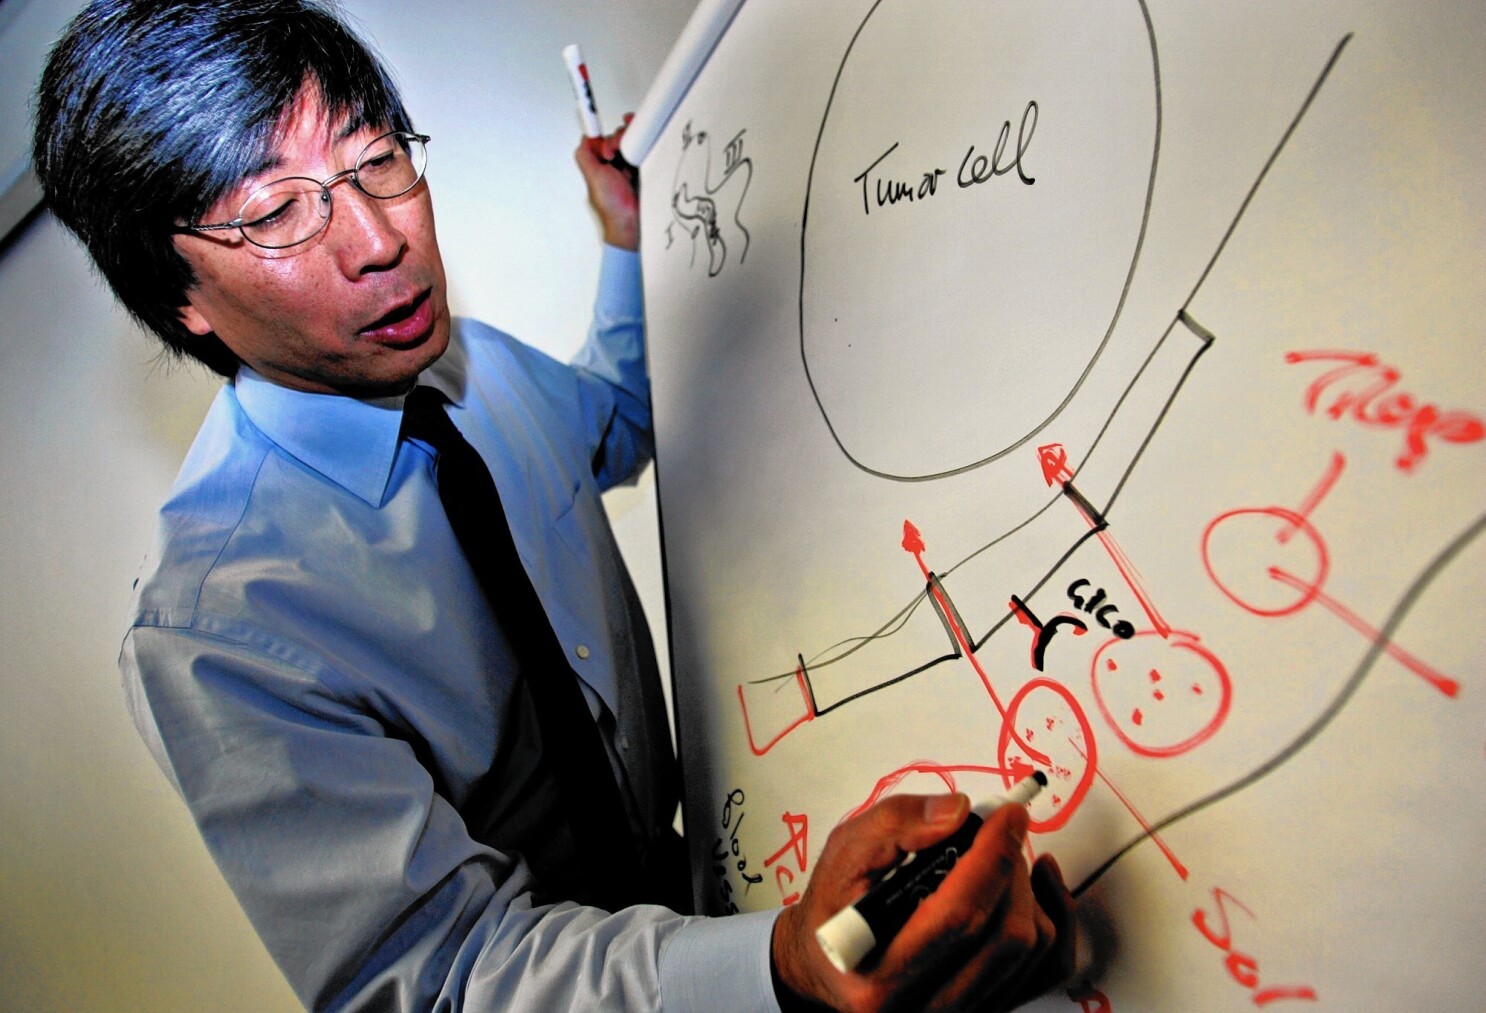 Patrick soon shiong ipo forex tester 2 purchase